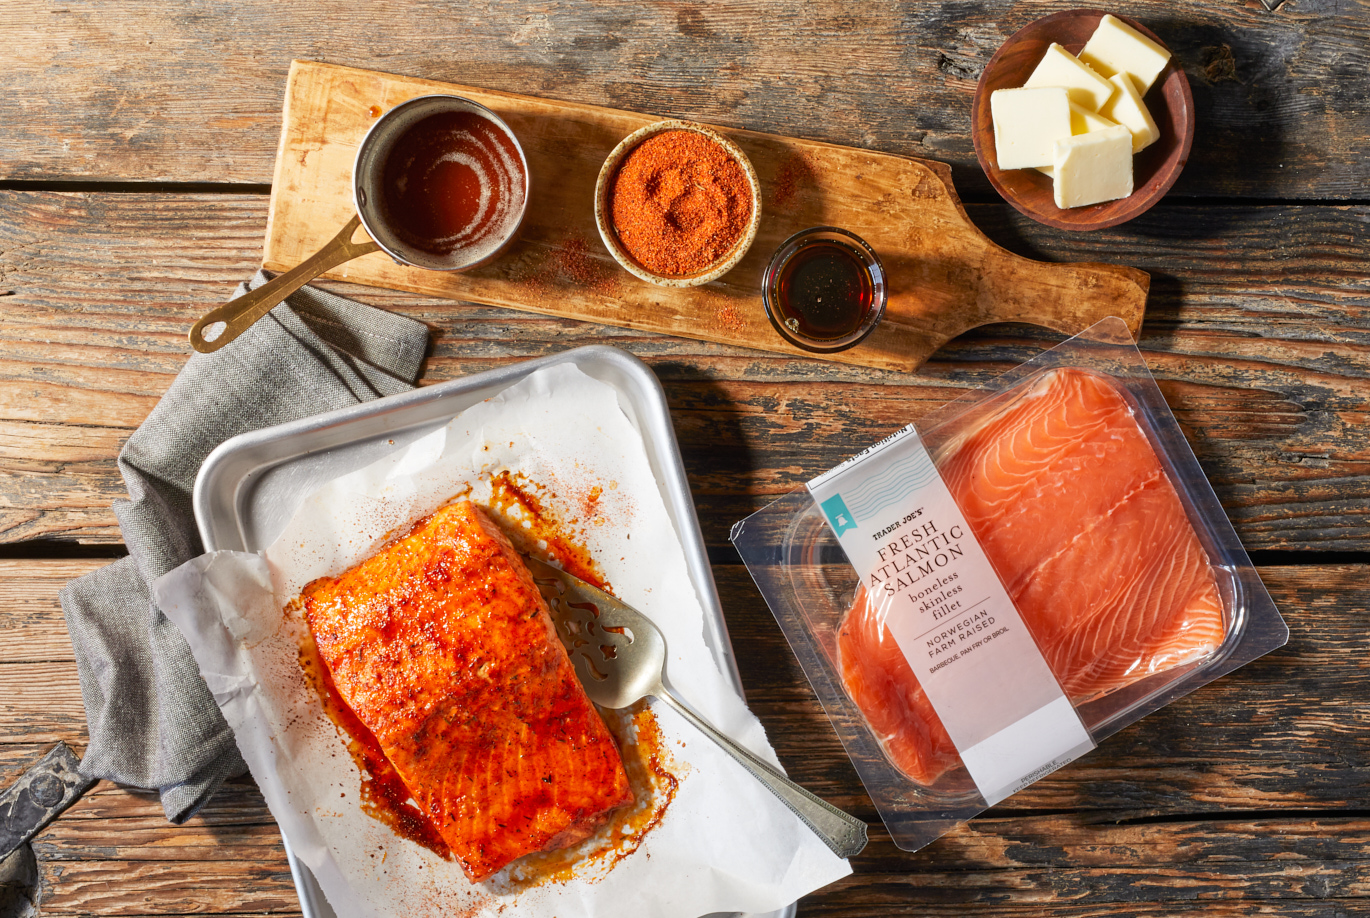 Trader Joe's Fresh Atlantic Salmon; shown in recipe for Maple & Brown Butter Salmon; a rustic wood surface with roasted salmon on baking sheet; prep ingredients above showing butter, brown butter, salmon rub and maple syrup